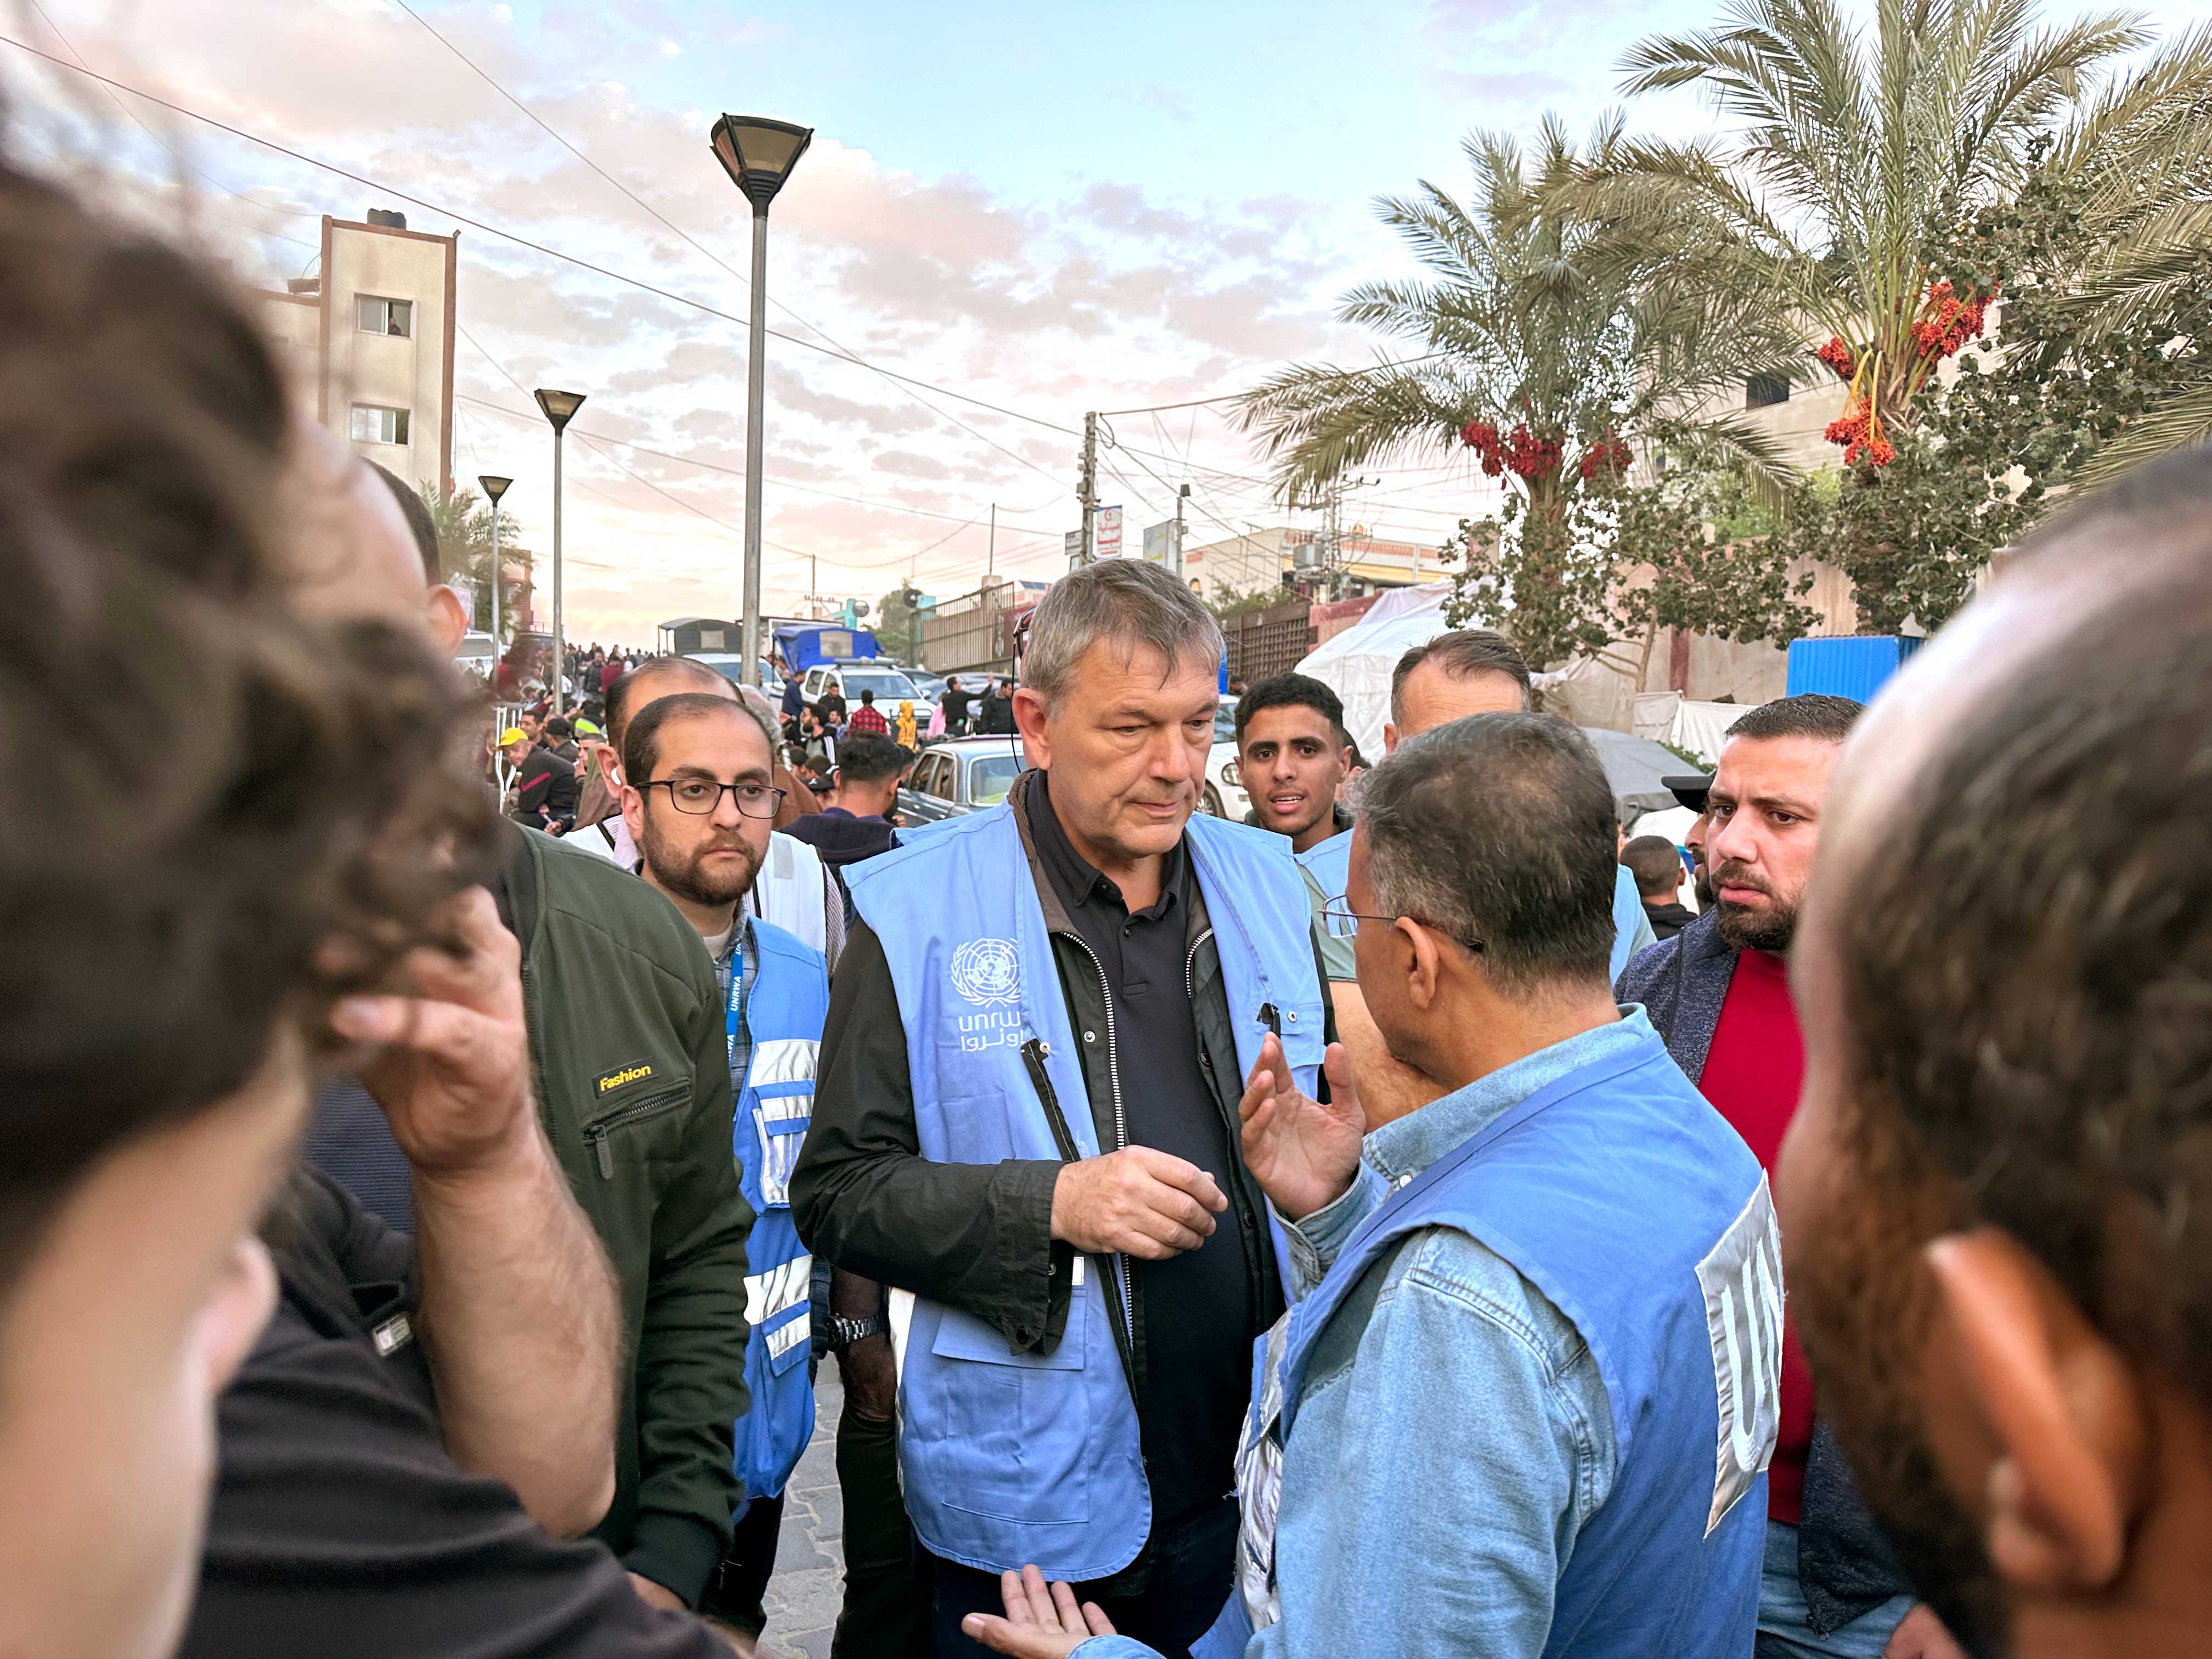 Lazzarini is seen outdoors within a crowd as he speaks with UNRWA colleagues all wearing the blue UNRWA vest